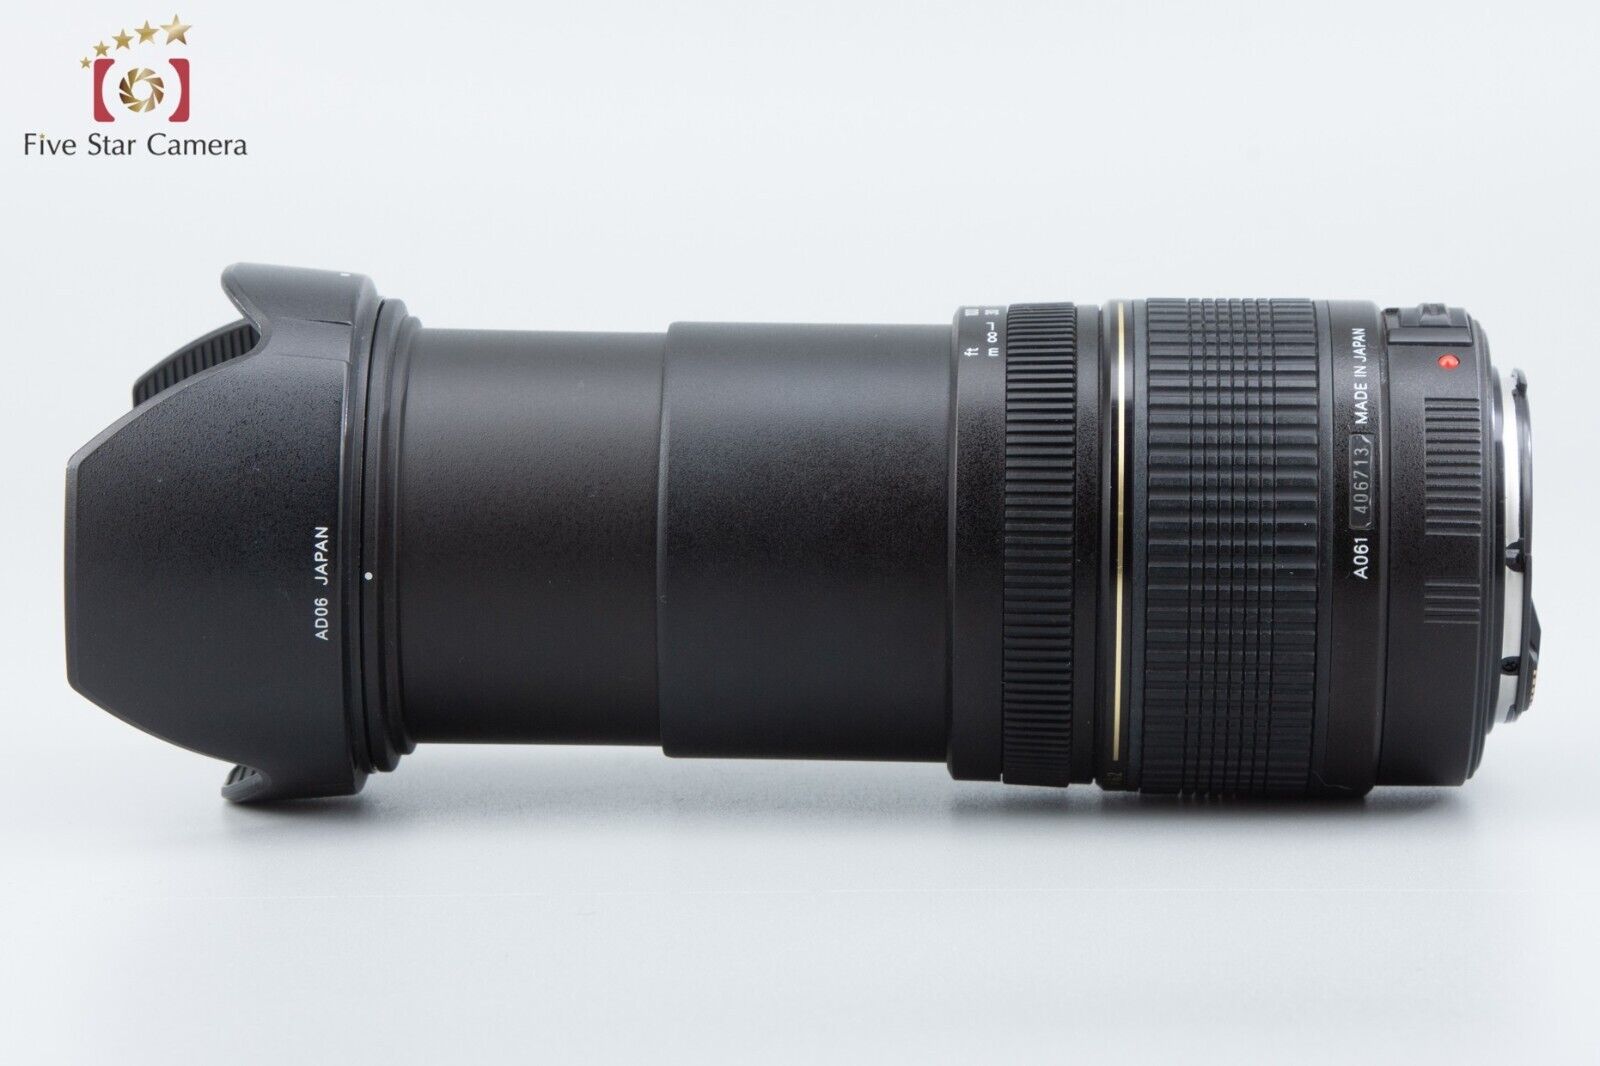 Excellent!! Tamron A061 AF 28-300mm f/3.5-6.3 XR Di LD IF MACRO for Canon